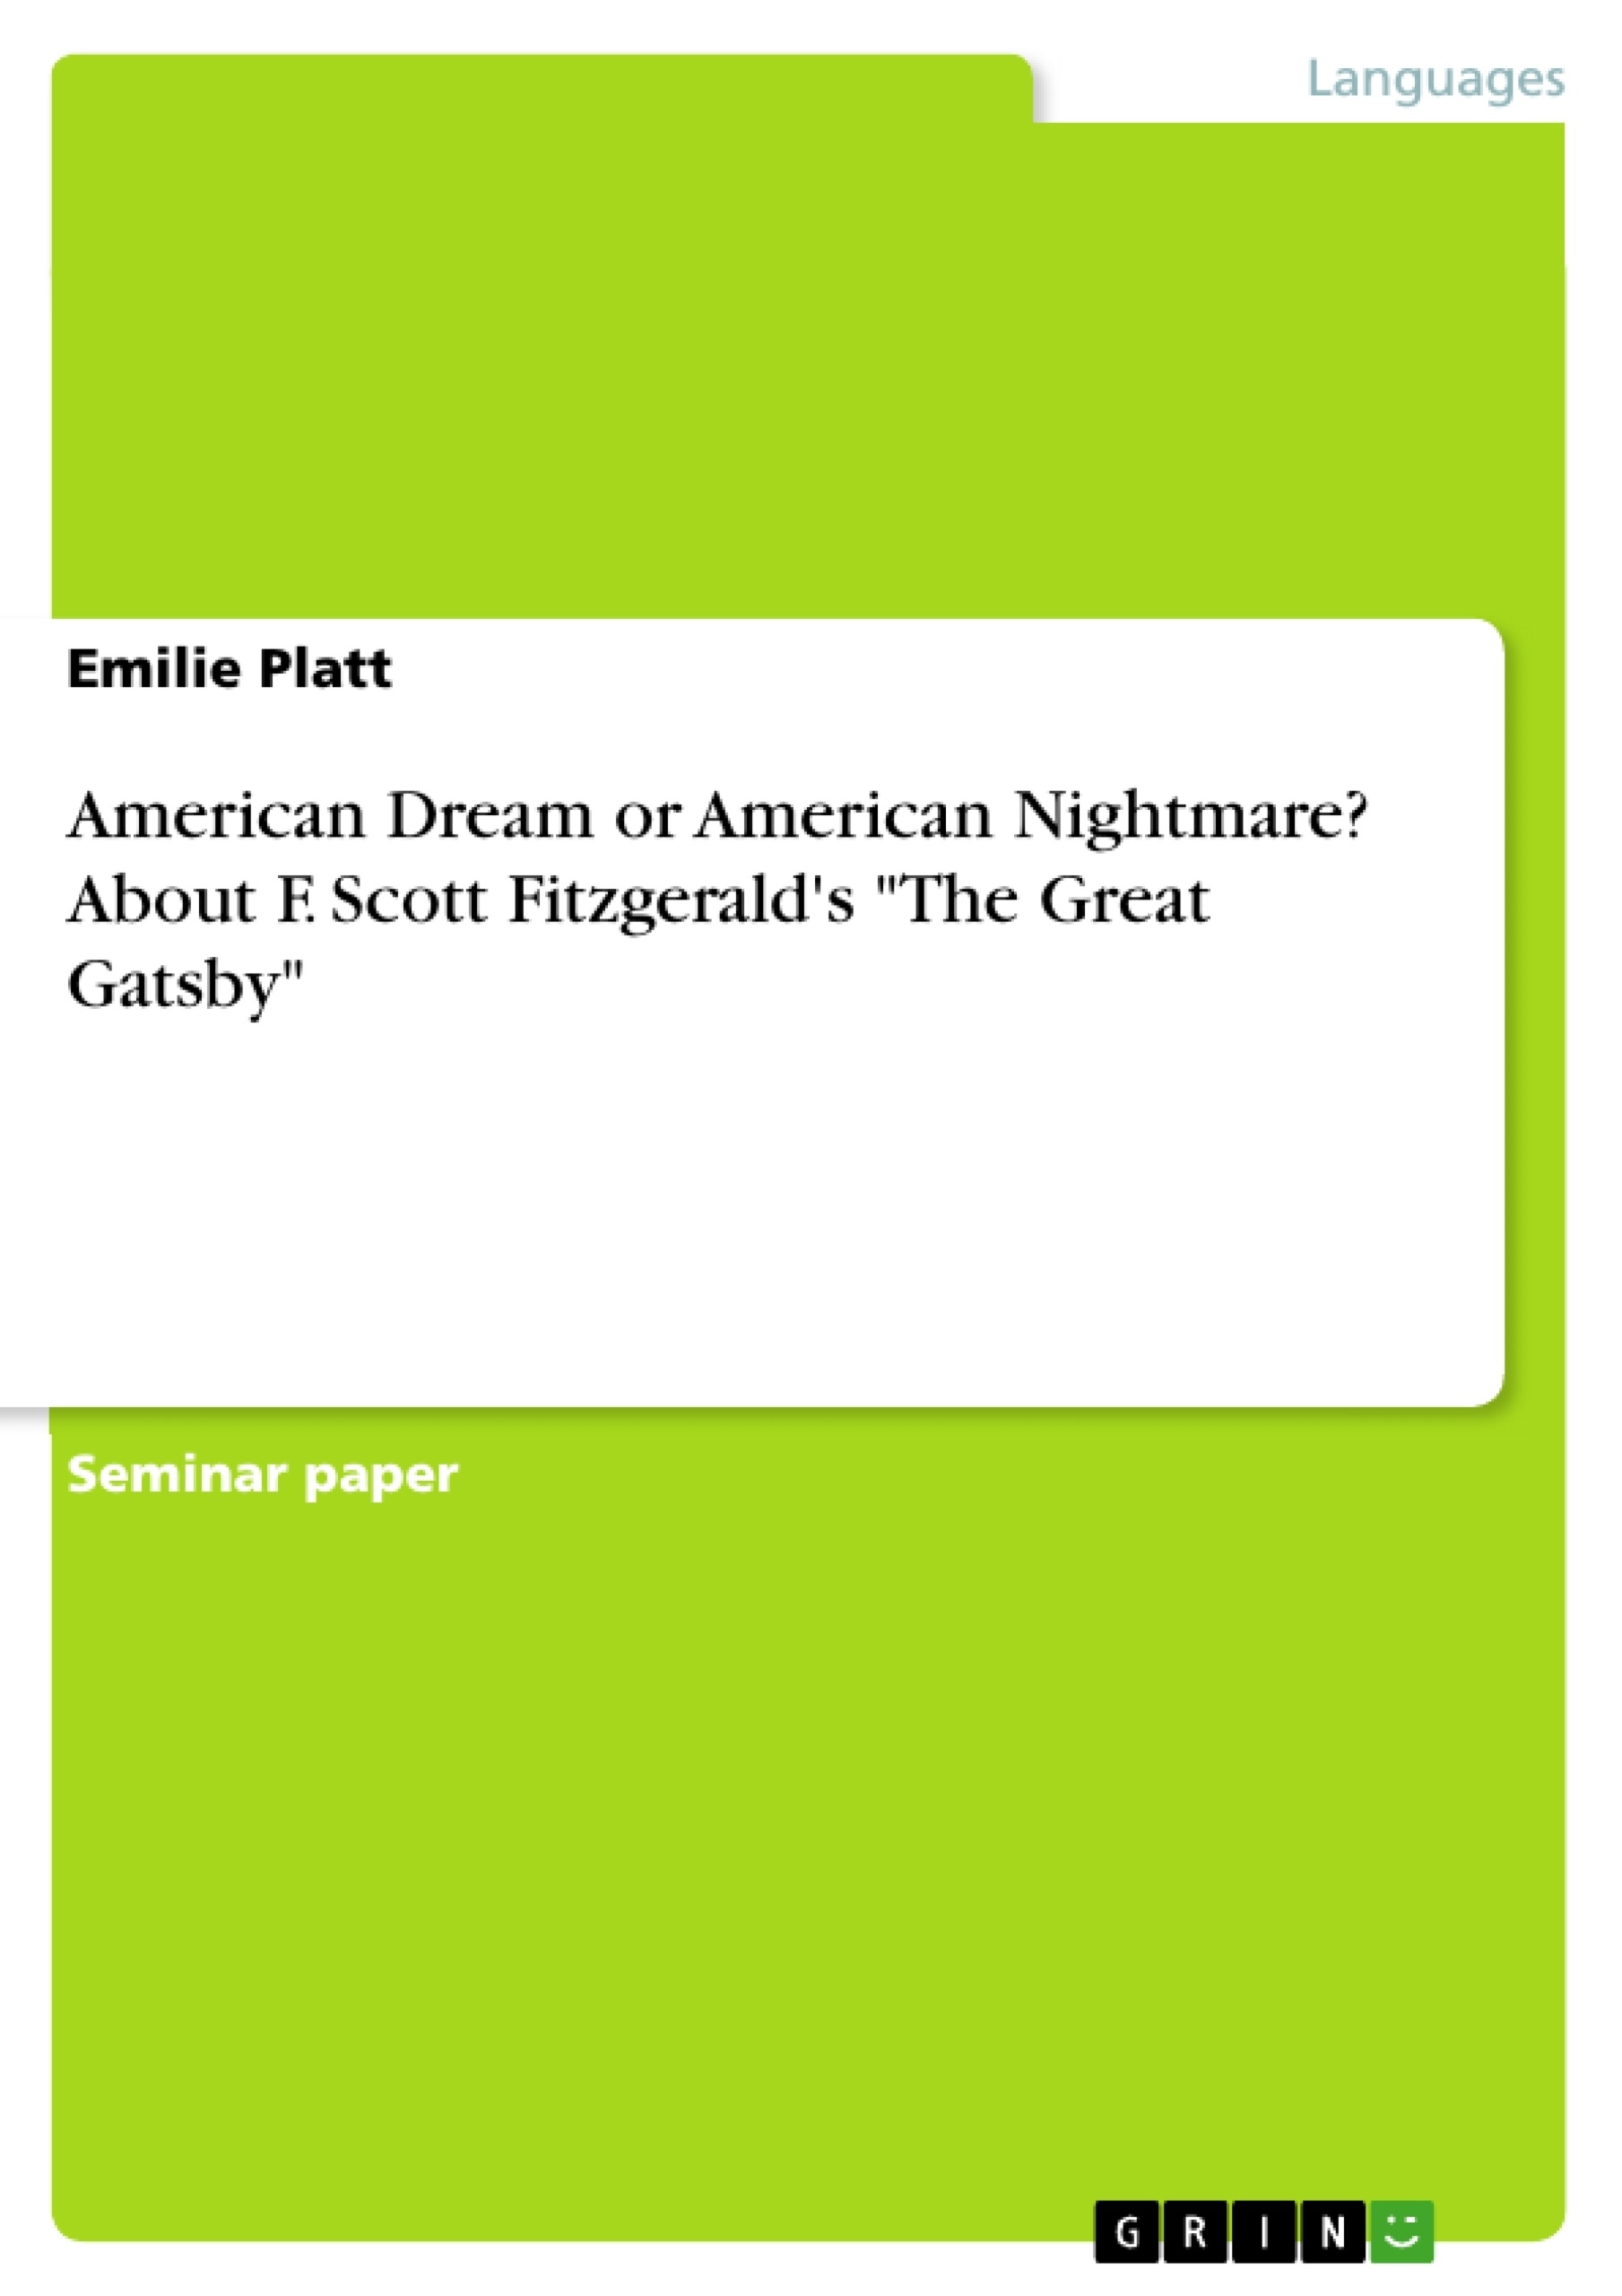 Title: American Dream or American Nightmare? About F. Scott Fitzgerald's "The Great Gatsby"